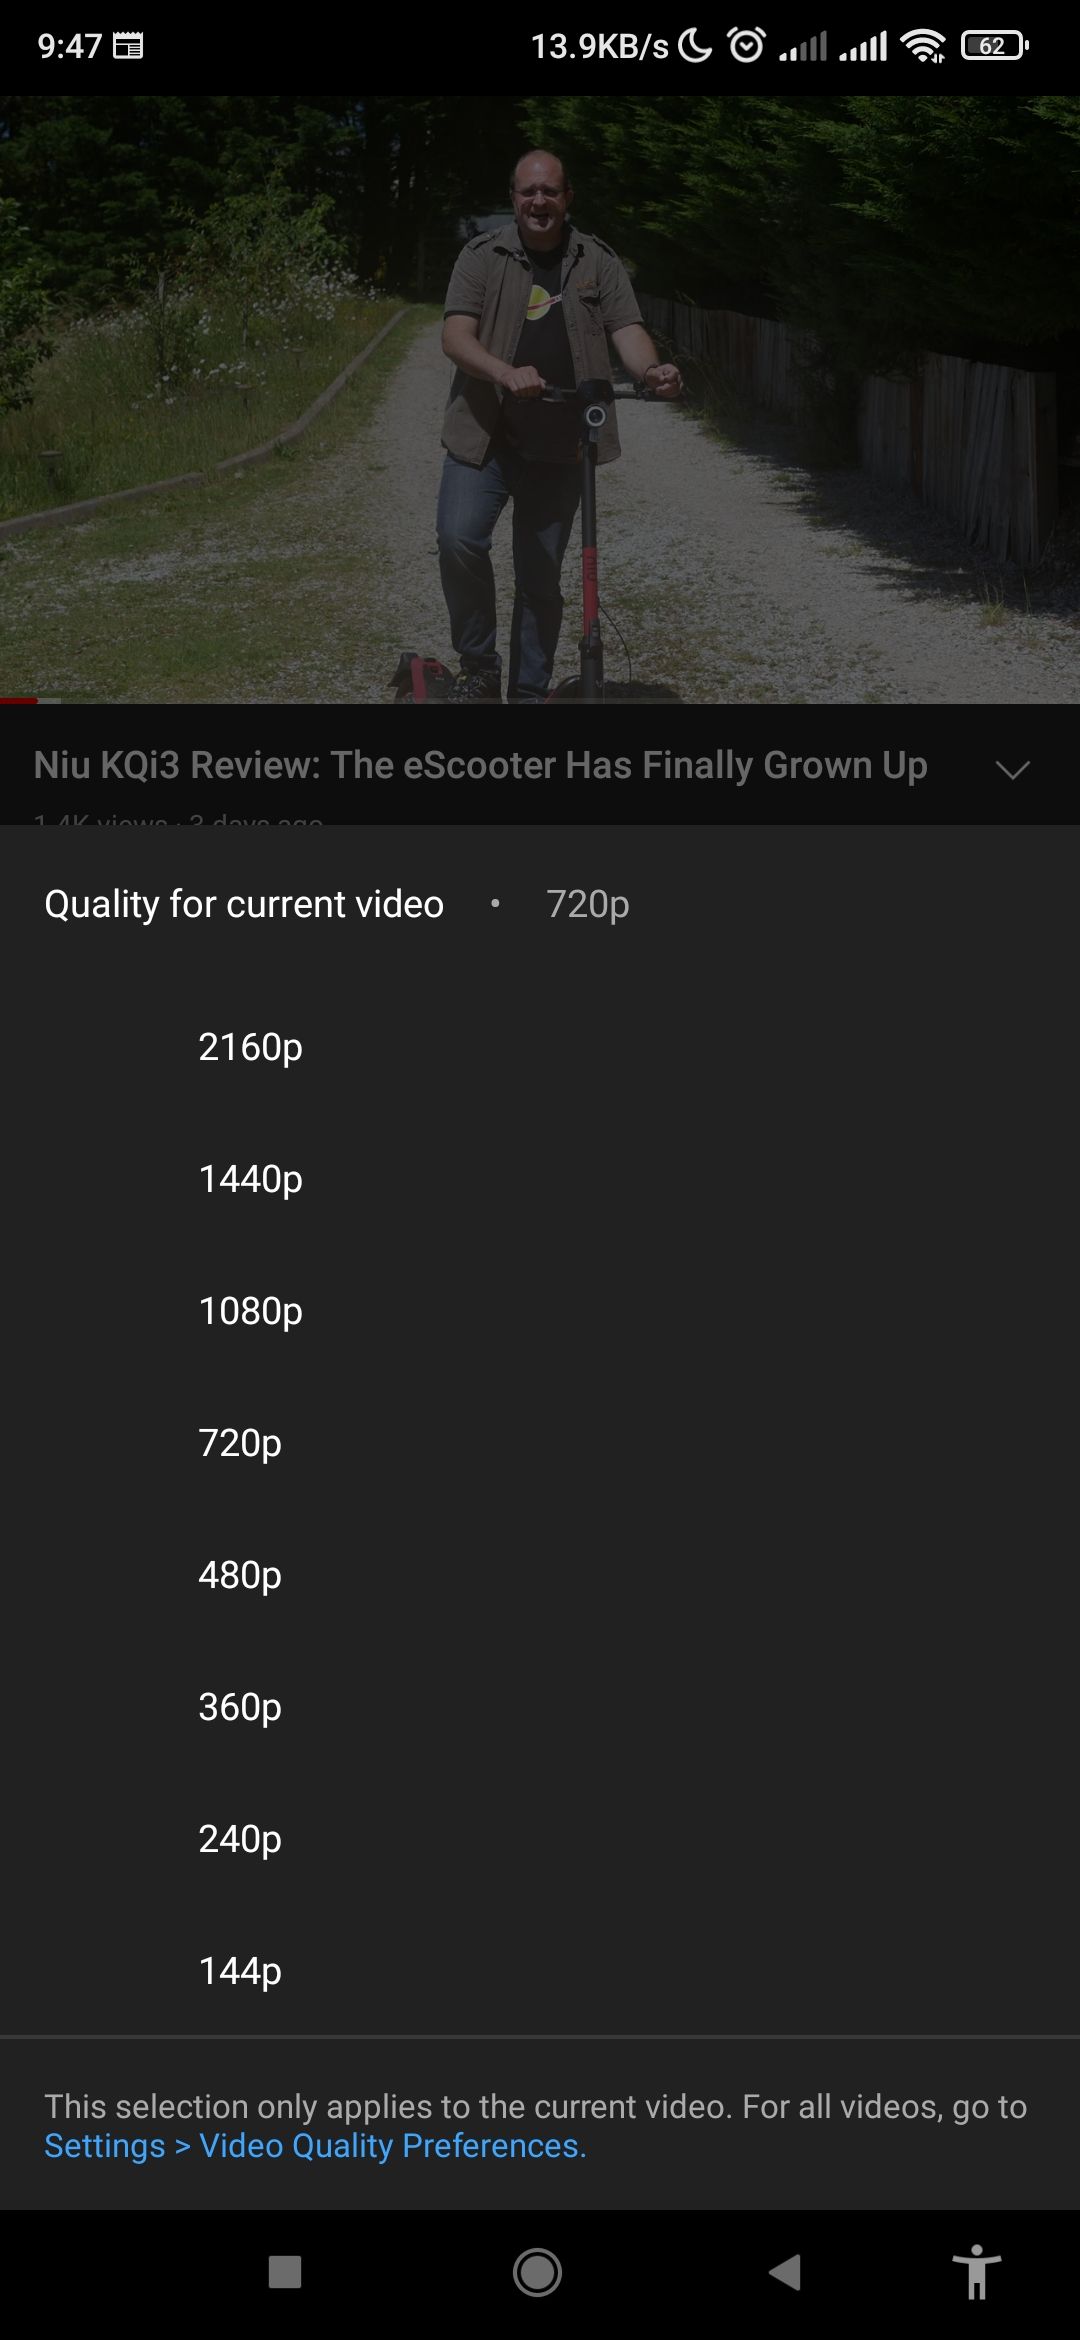 for best quality adjust to 1080p or 720p